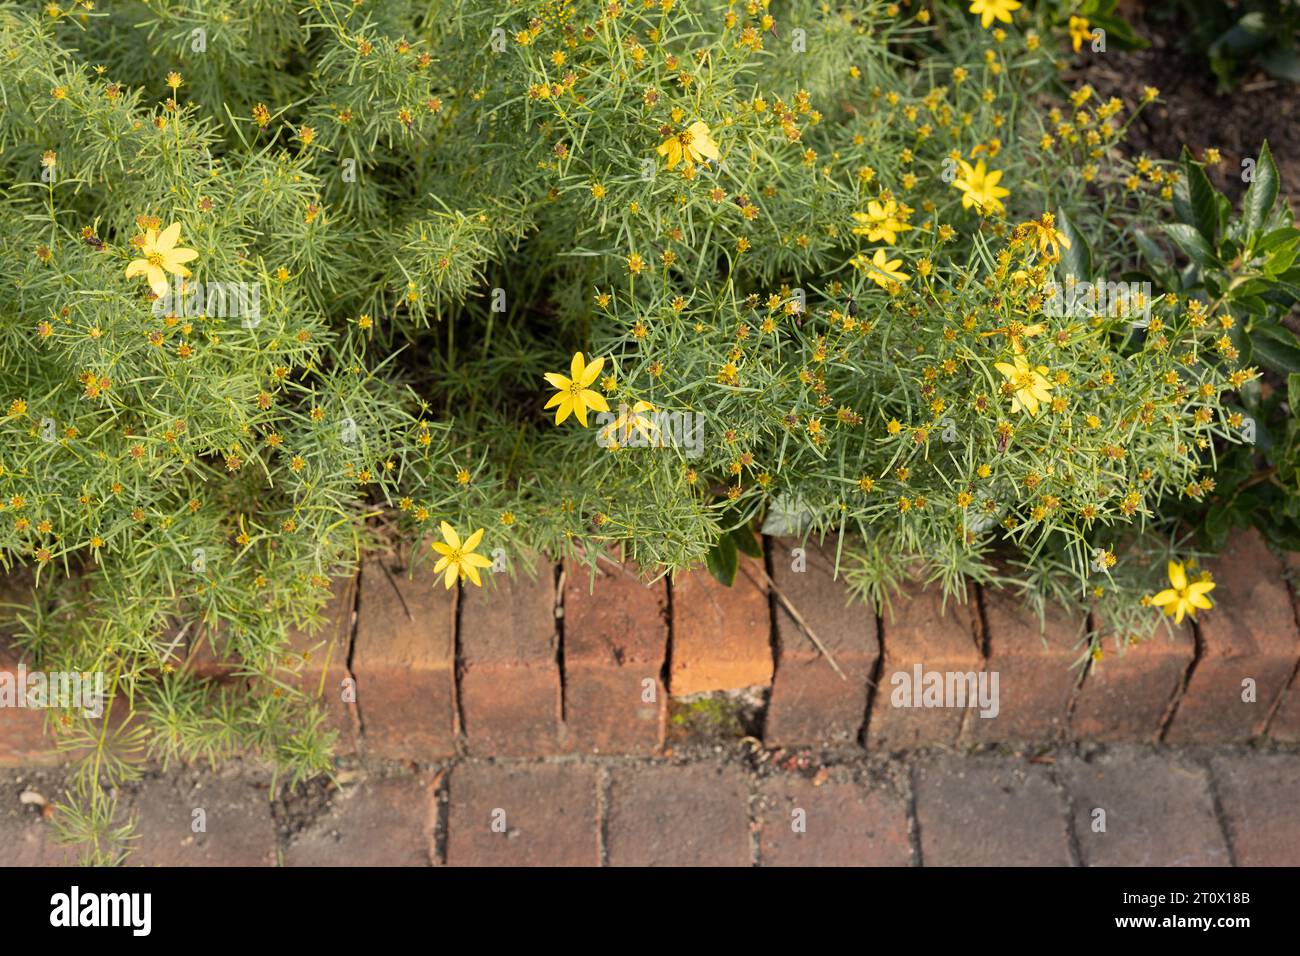 Coreopsis verticillata 'Zagreb' flowers growing in a flower bed. Stock Photo